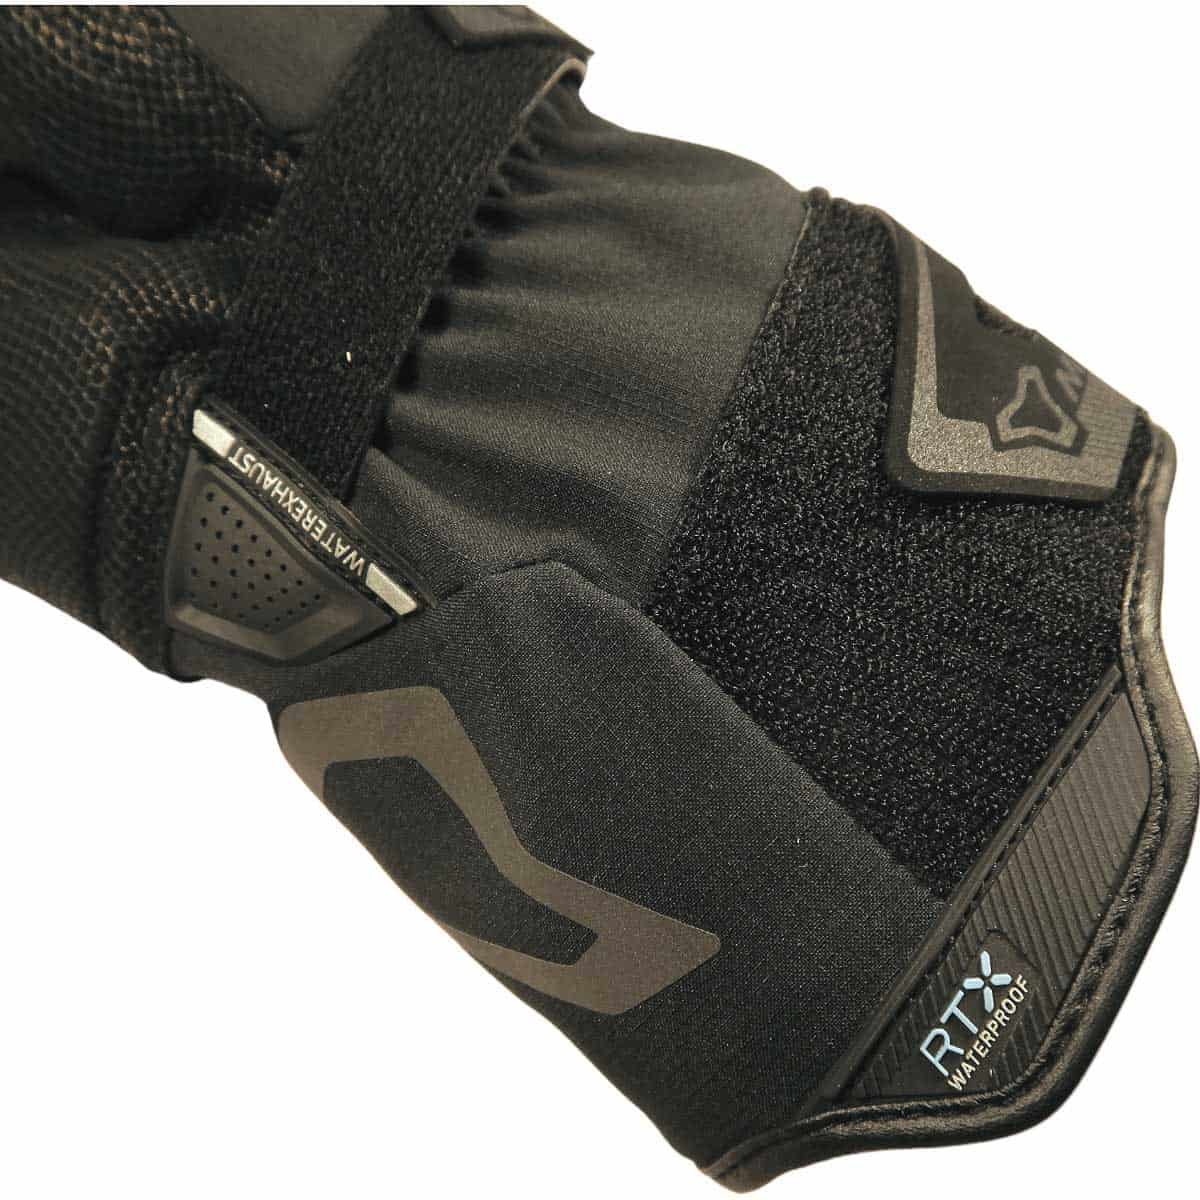 Macna Azra RTX Heated Gloves Kit: A pair of Azra gloves bundled with a 7.4V / 2.2A batteries & charger pack - cuff 2